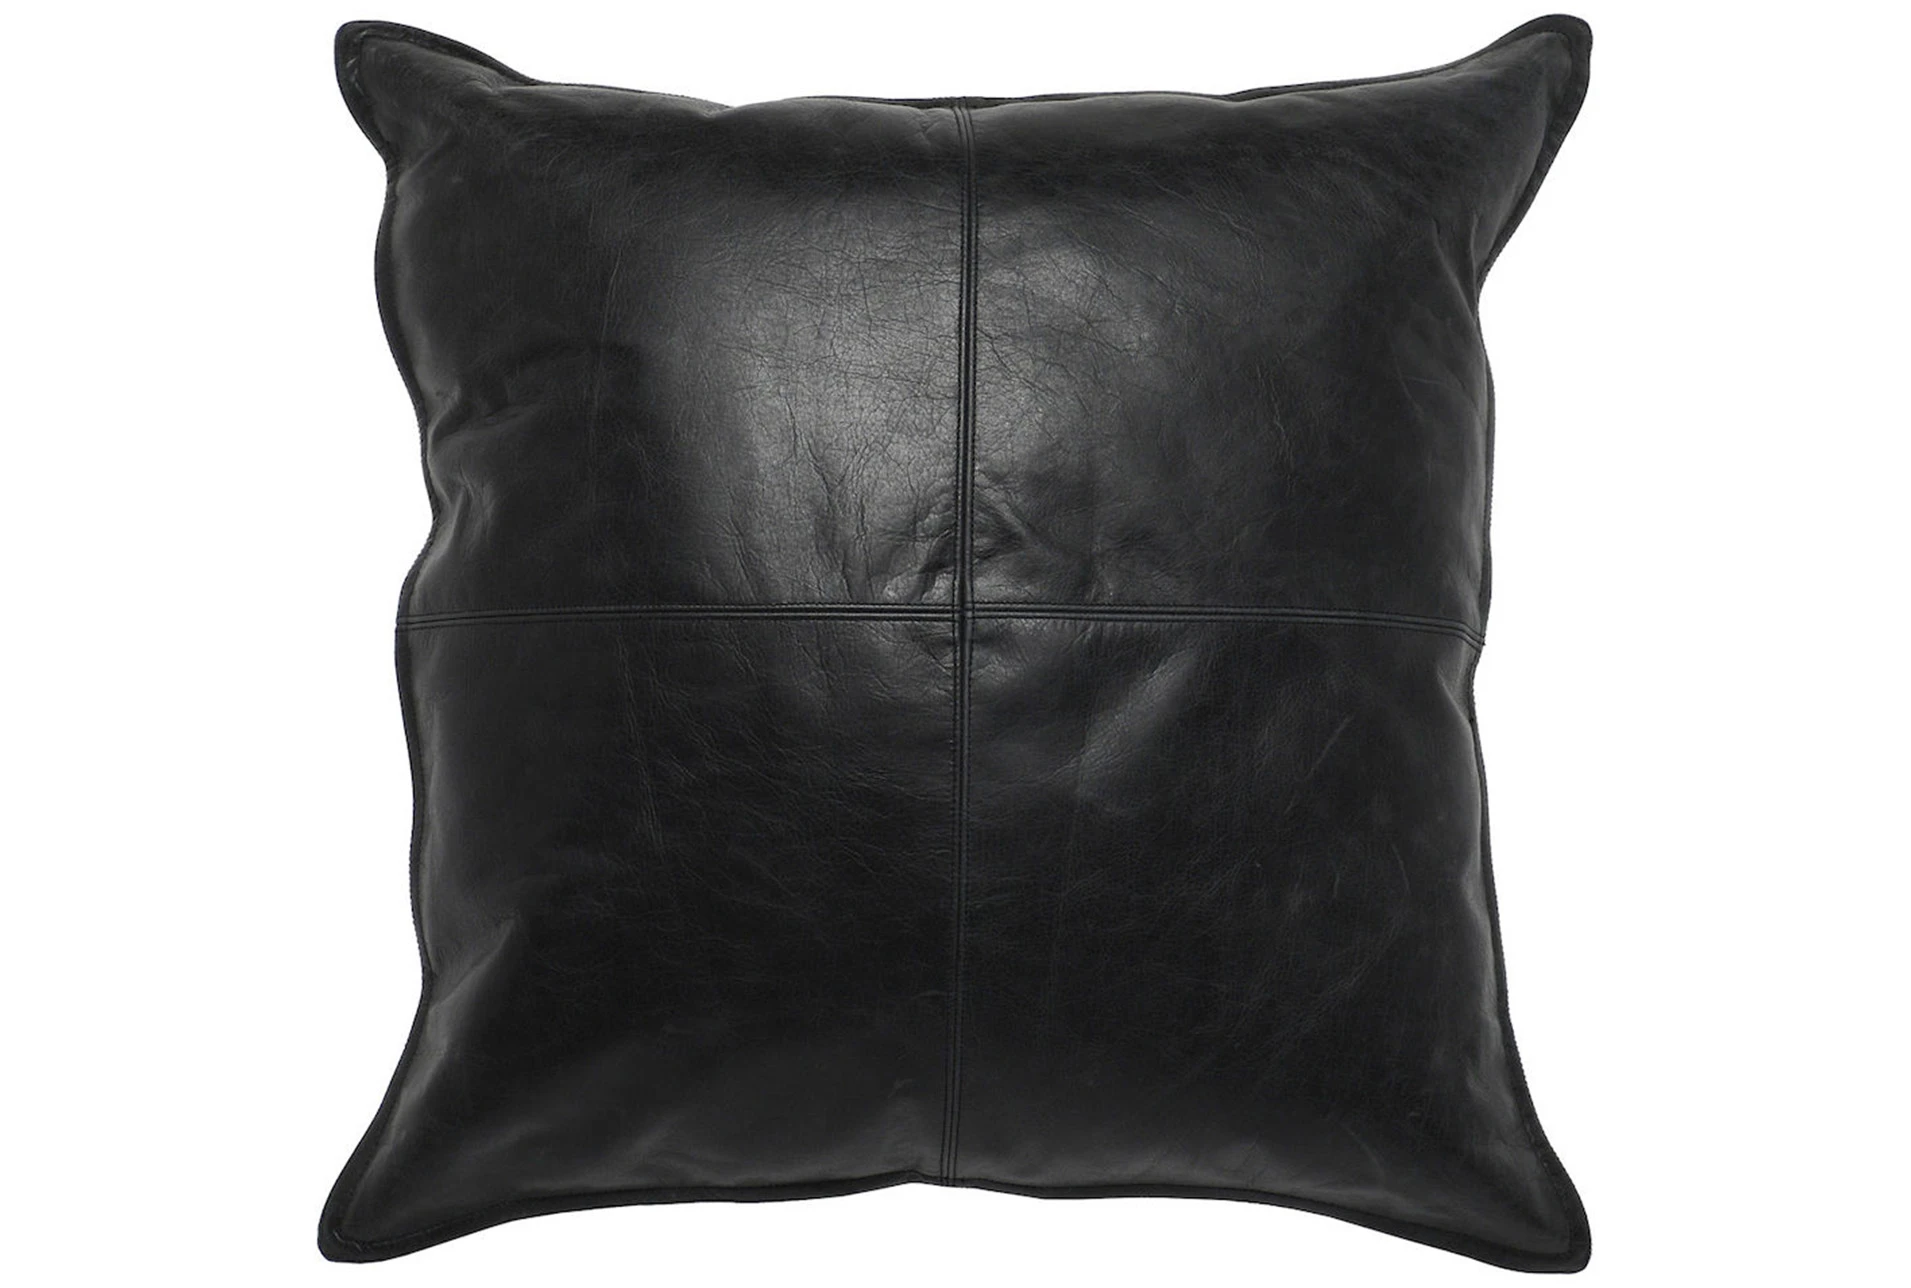 Accent Pillow Black Leather 22x22, Black Leather Cushion